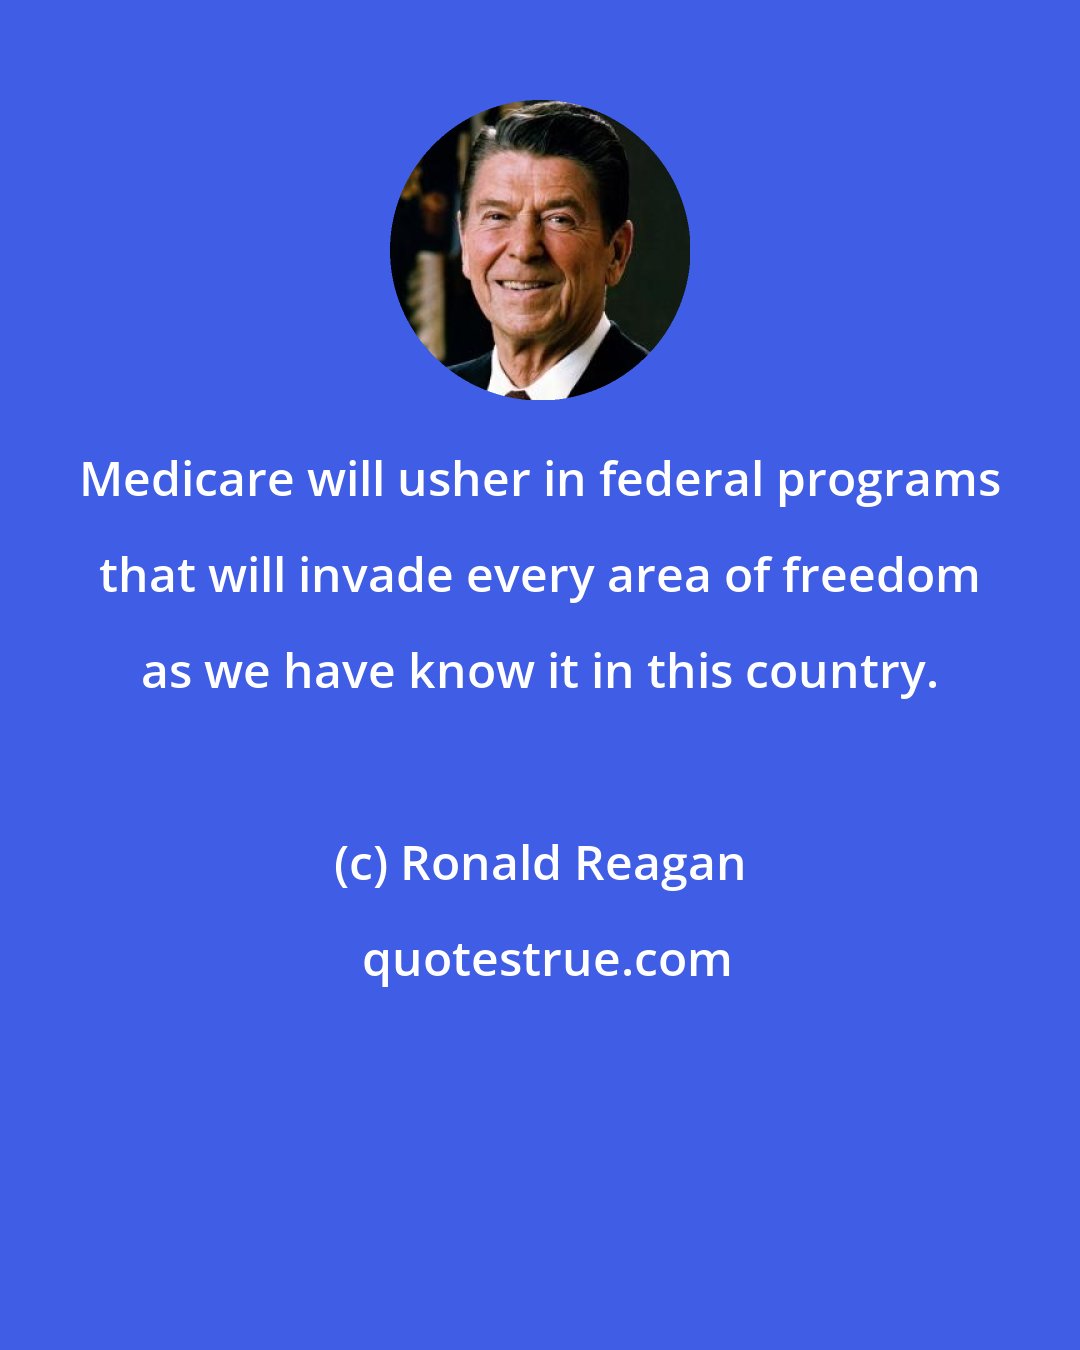 Ronald Reagan: Medicare will usher in federal programs that will invade every area of freedom as we have know it in this country.